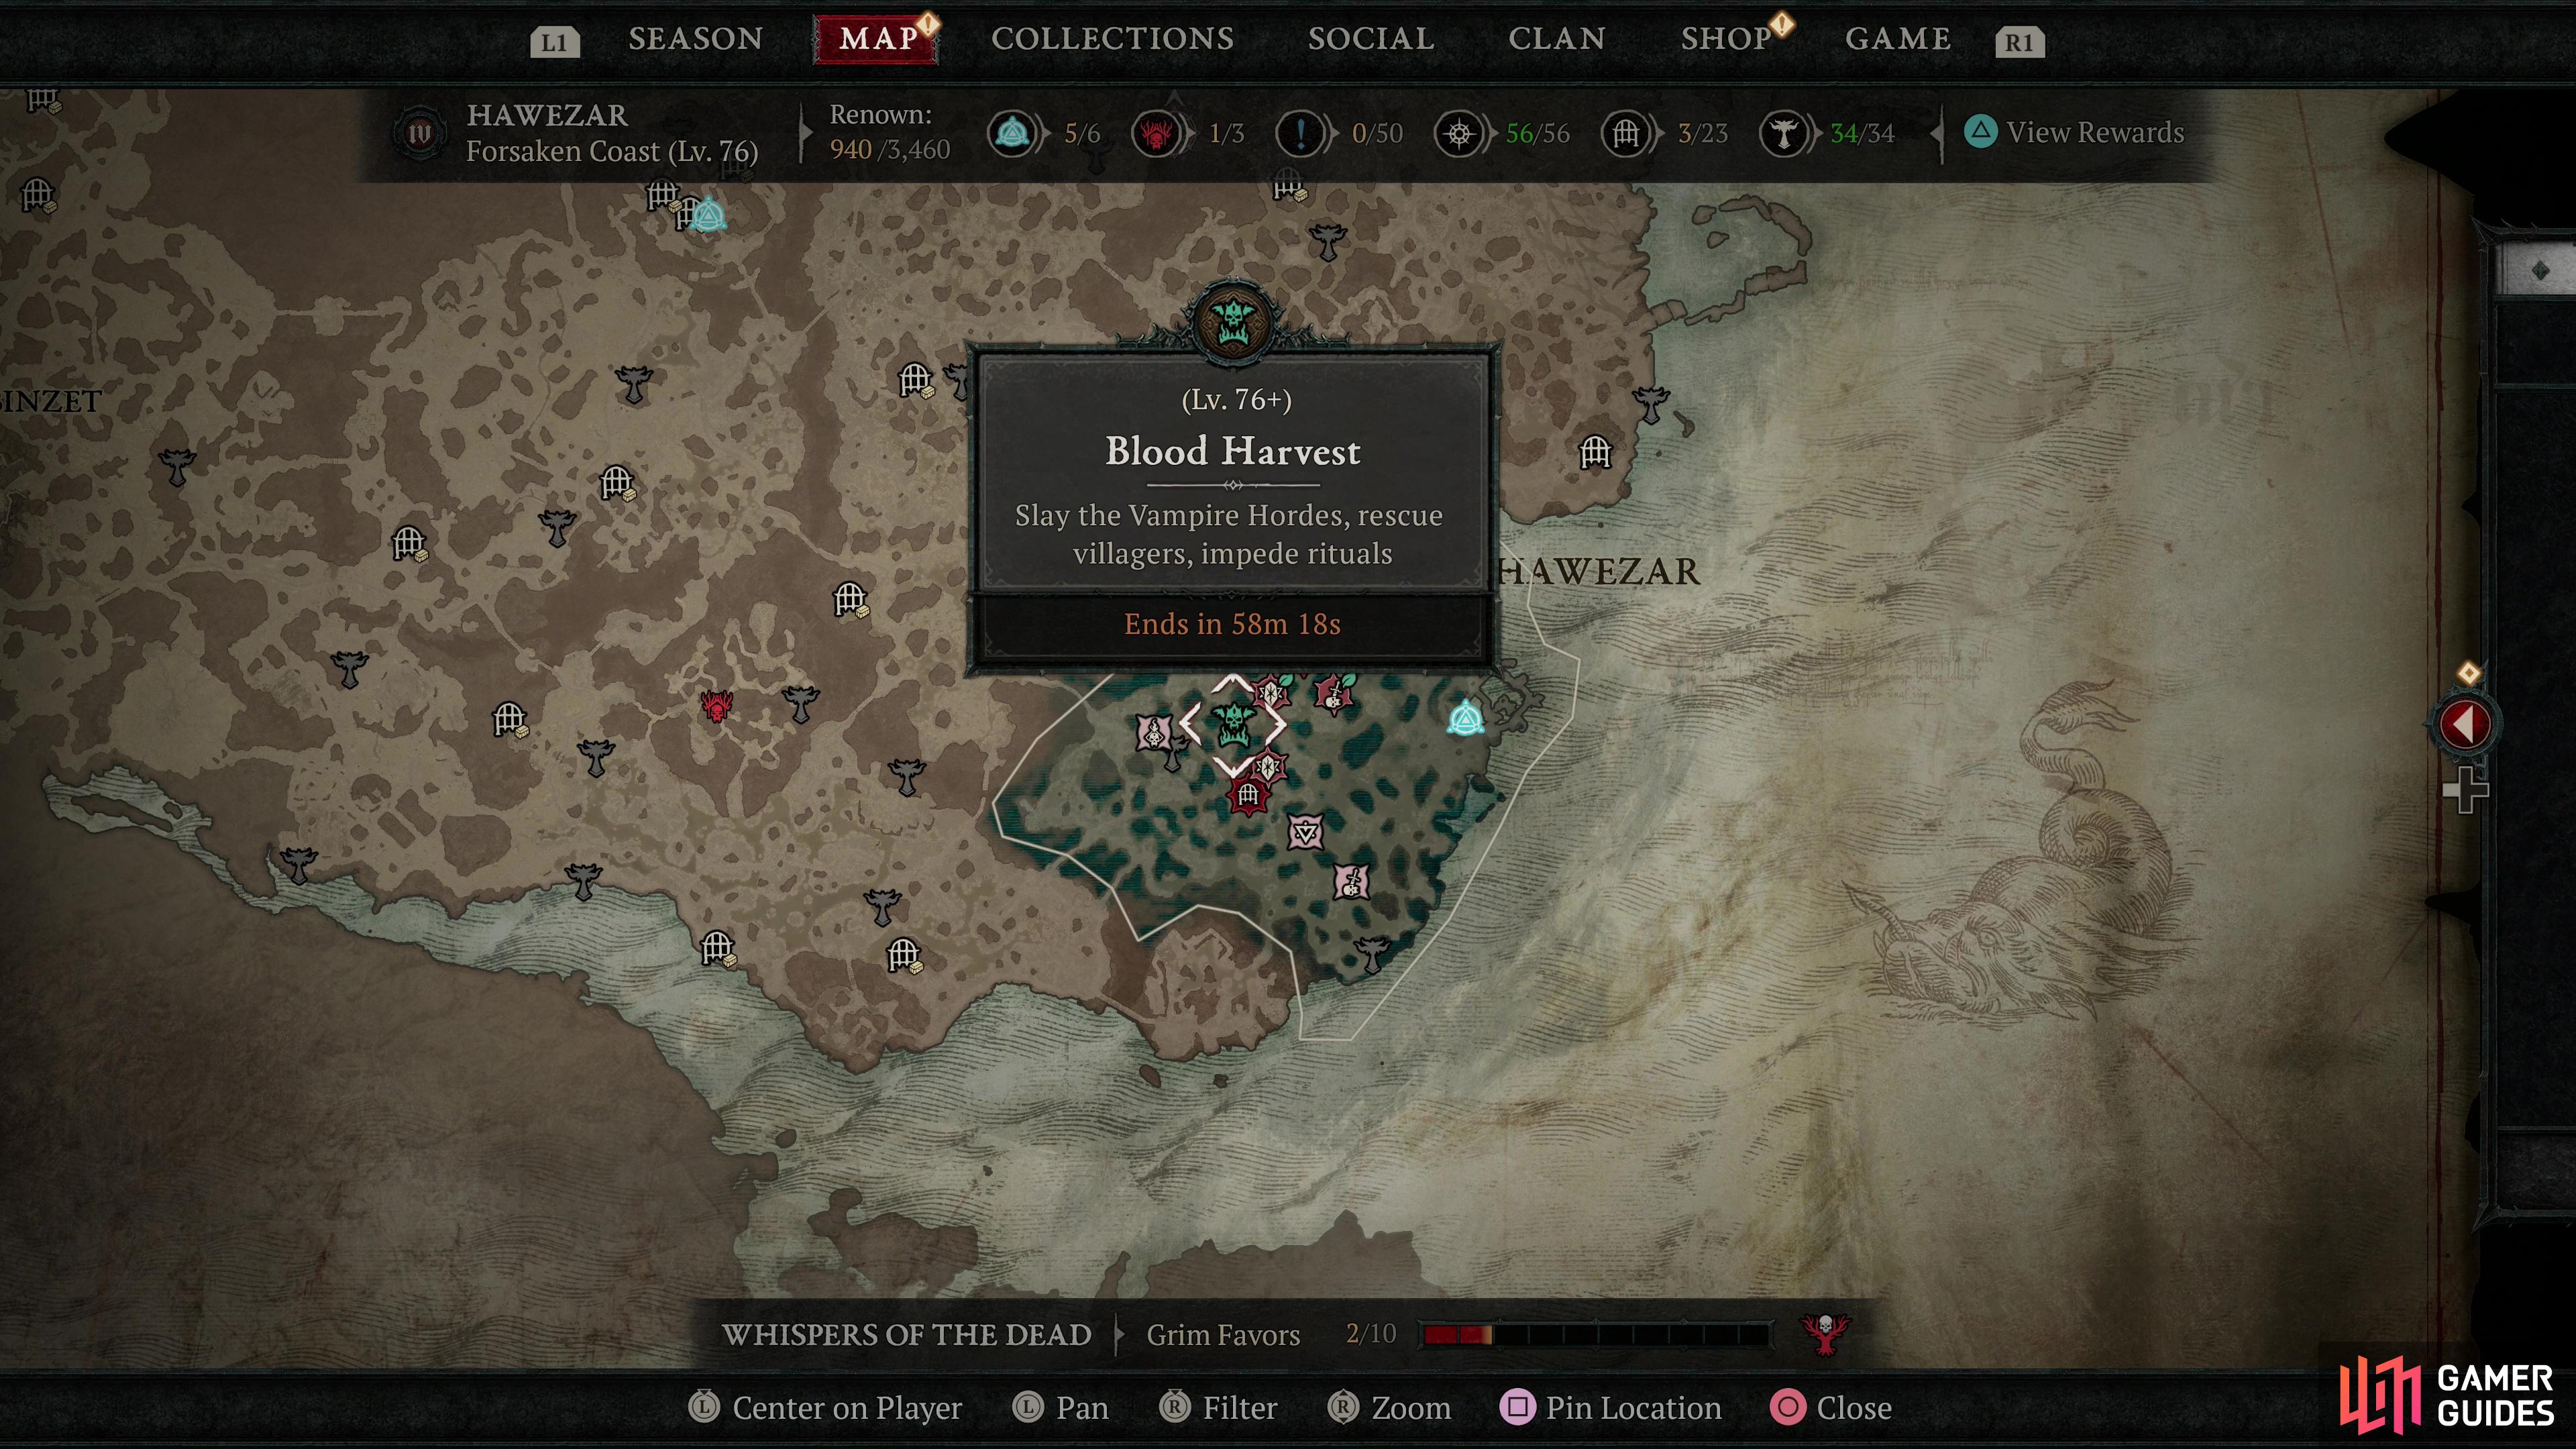 Blood Harvest events are marked on the map by a green color.